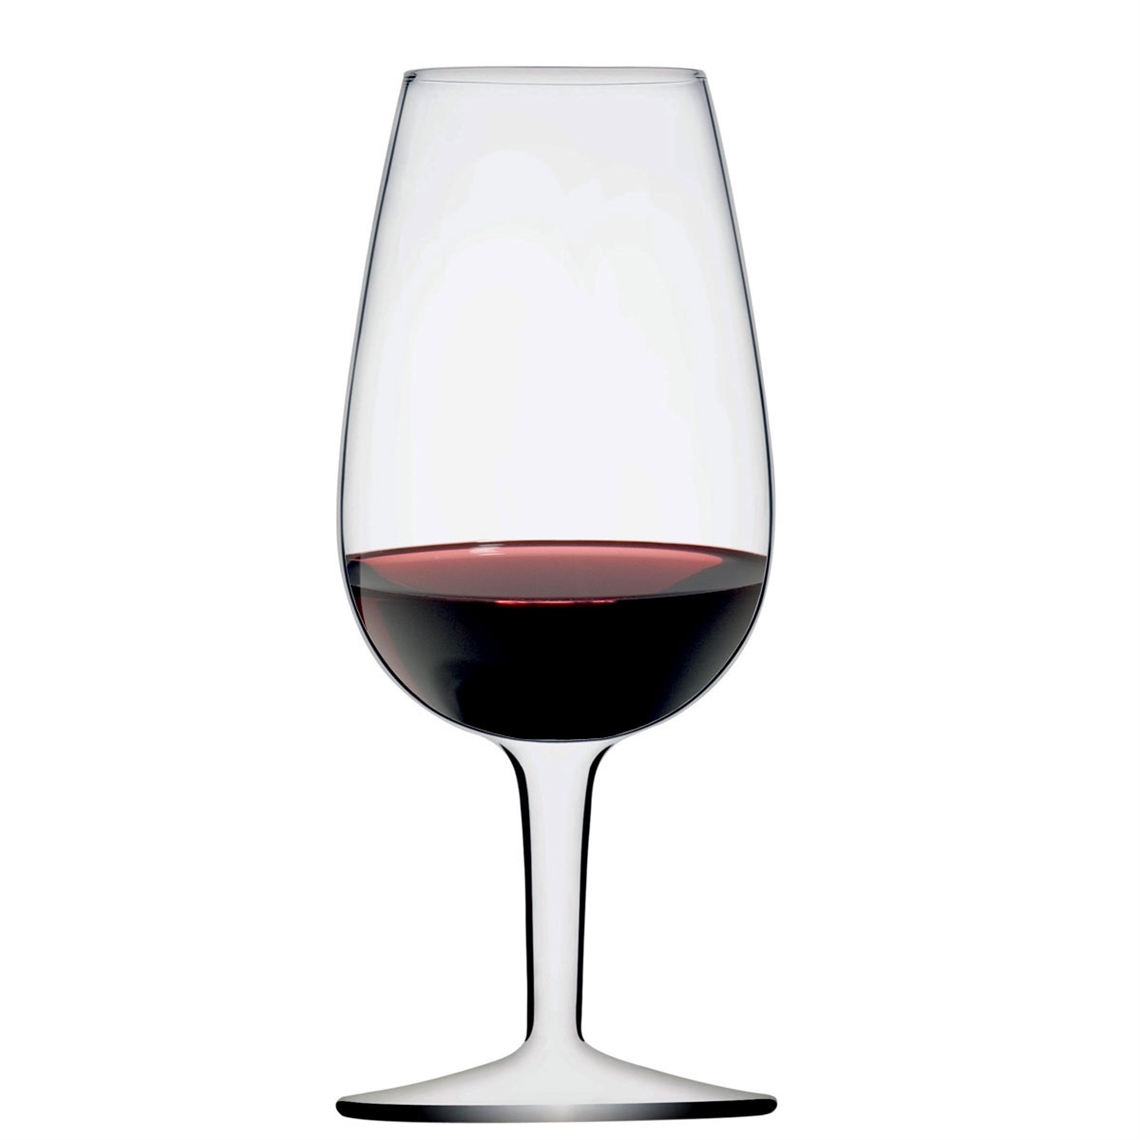 View more wine maps and charts from our Wine Tasting Glasses range